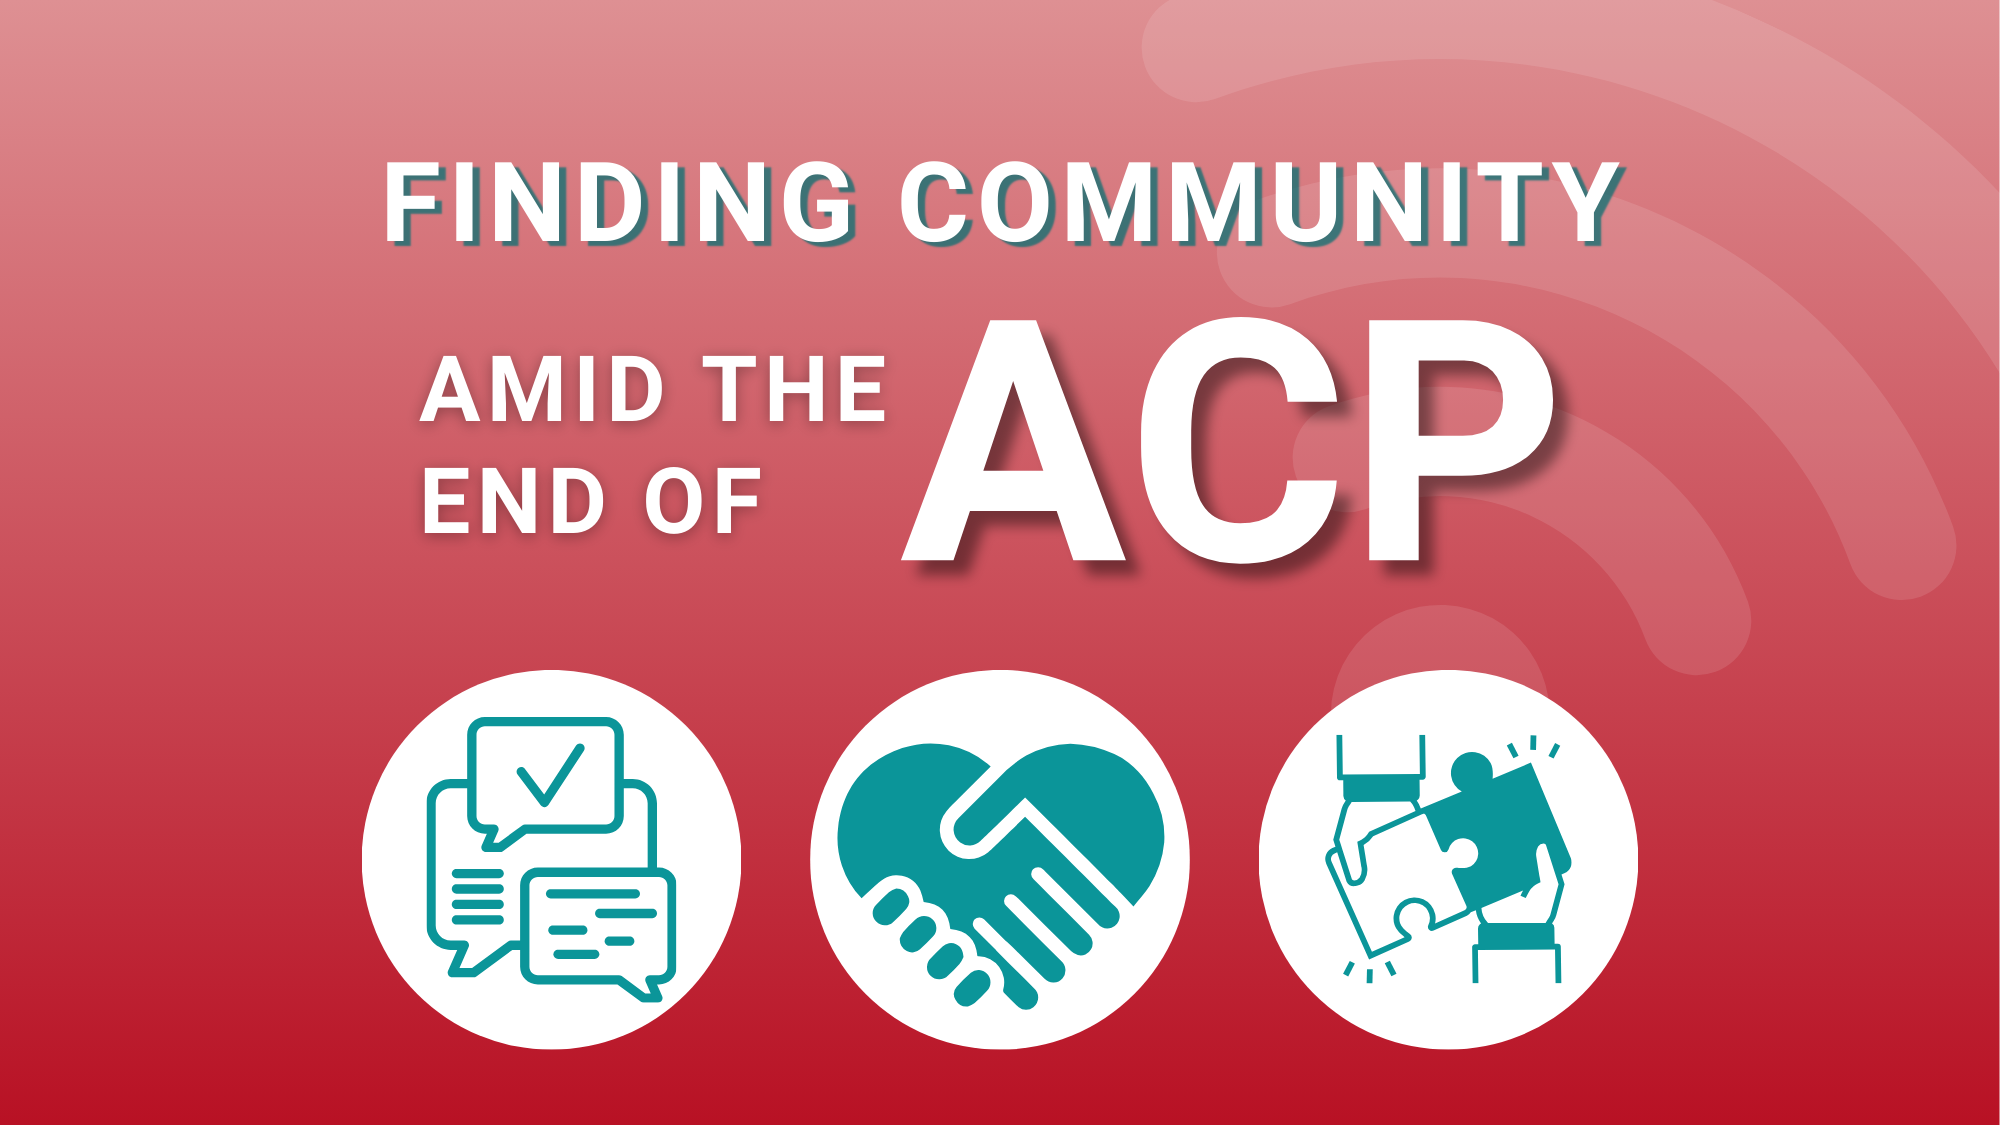 Graphic with red background says Finding Community amid the end of ACP; Three green icons show speech bubbles, hands shaking, adn puzzle pieces together